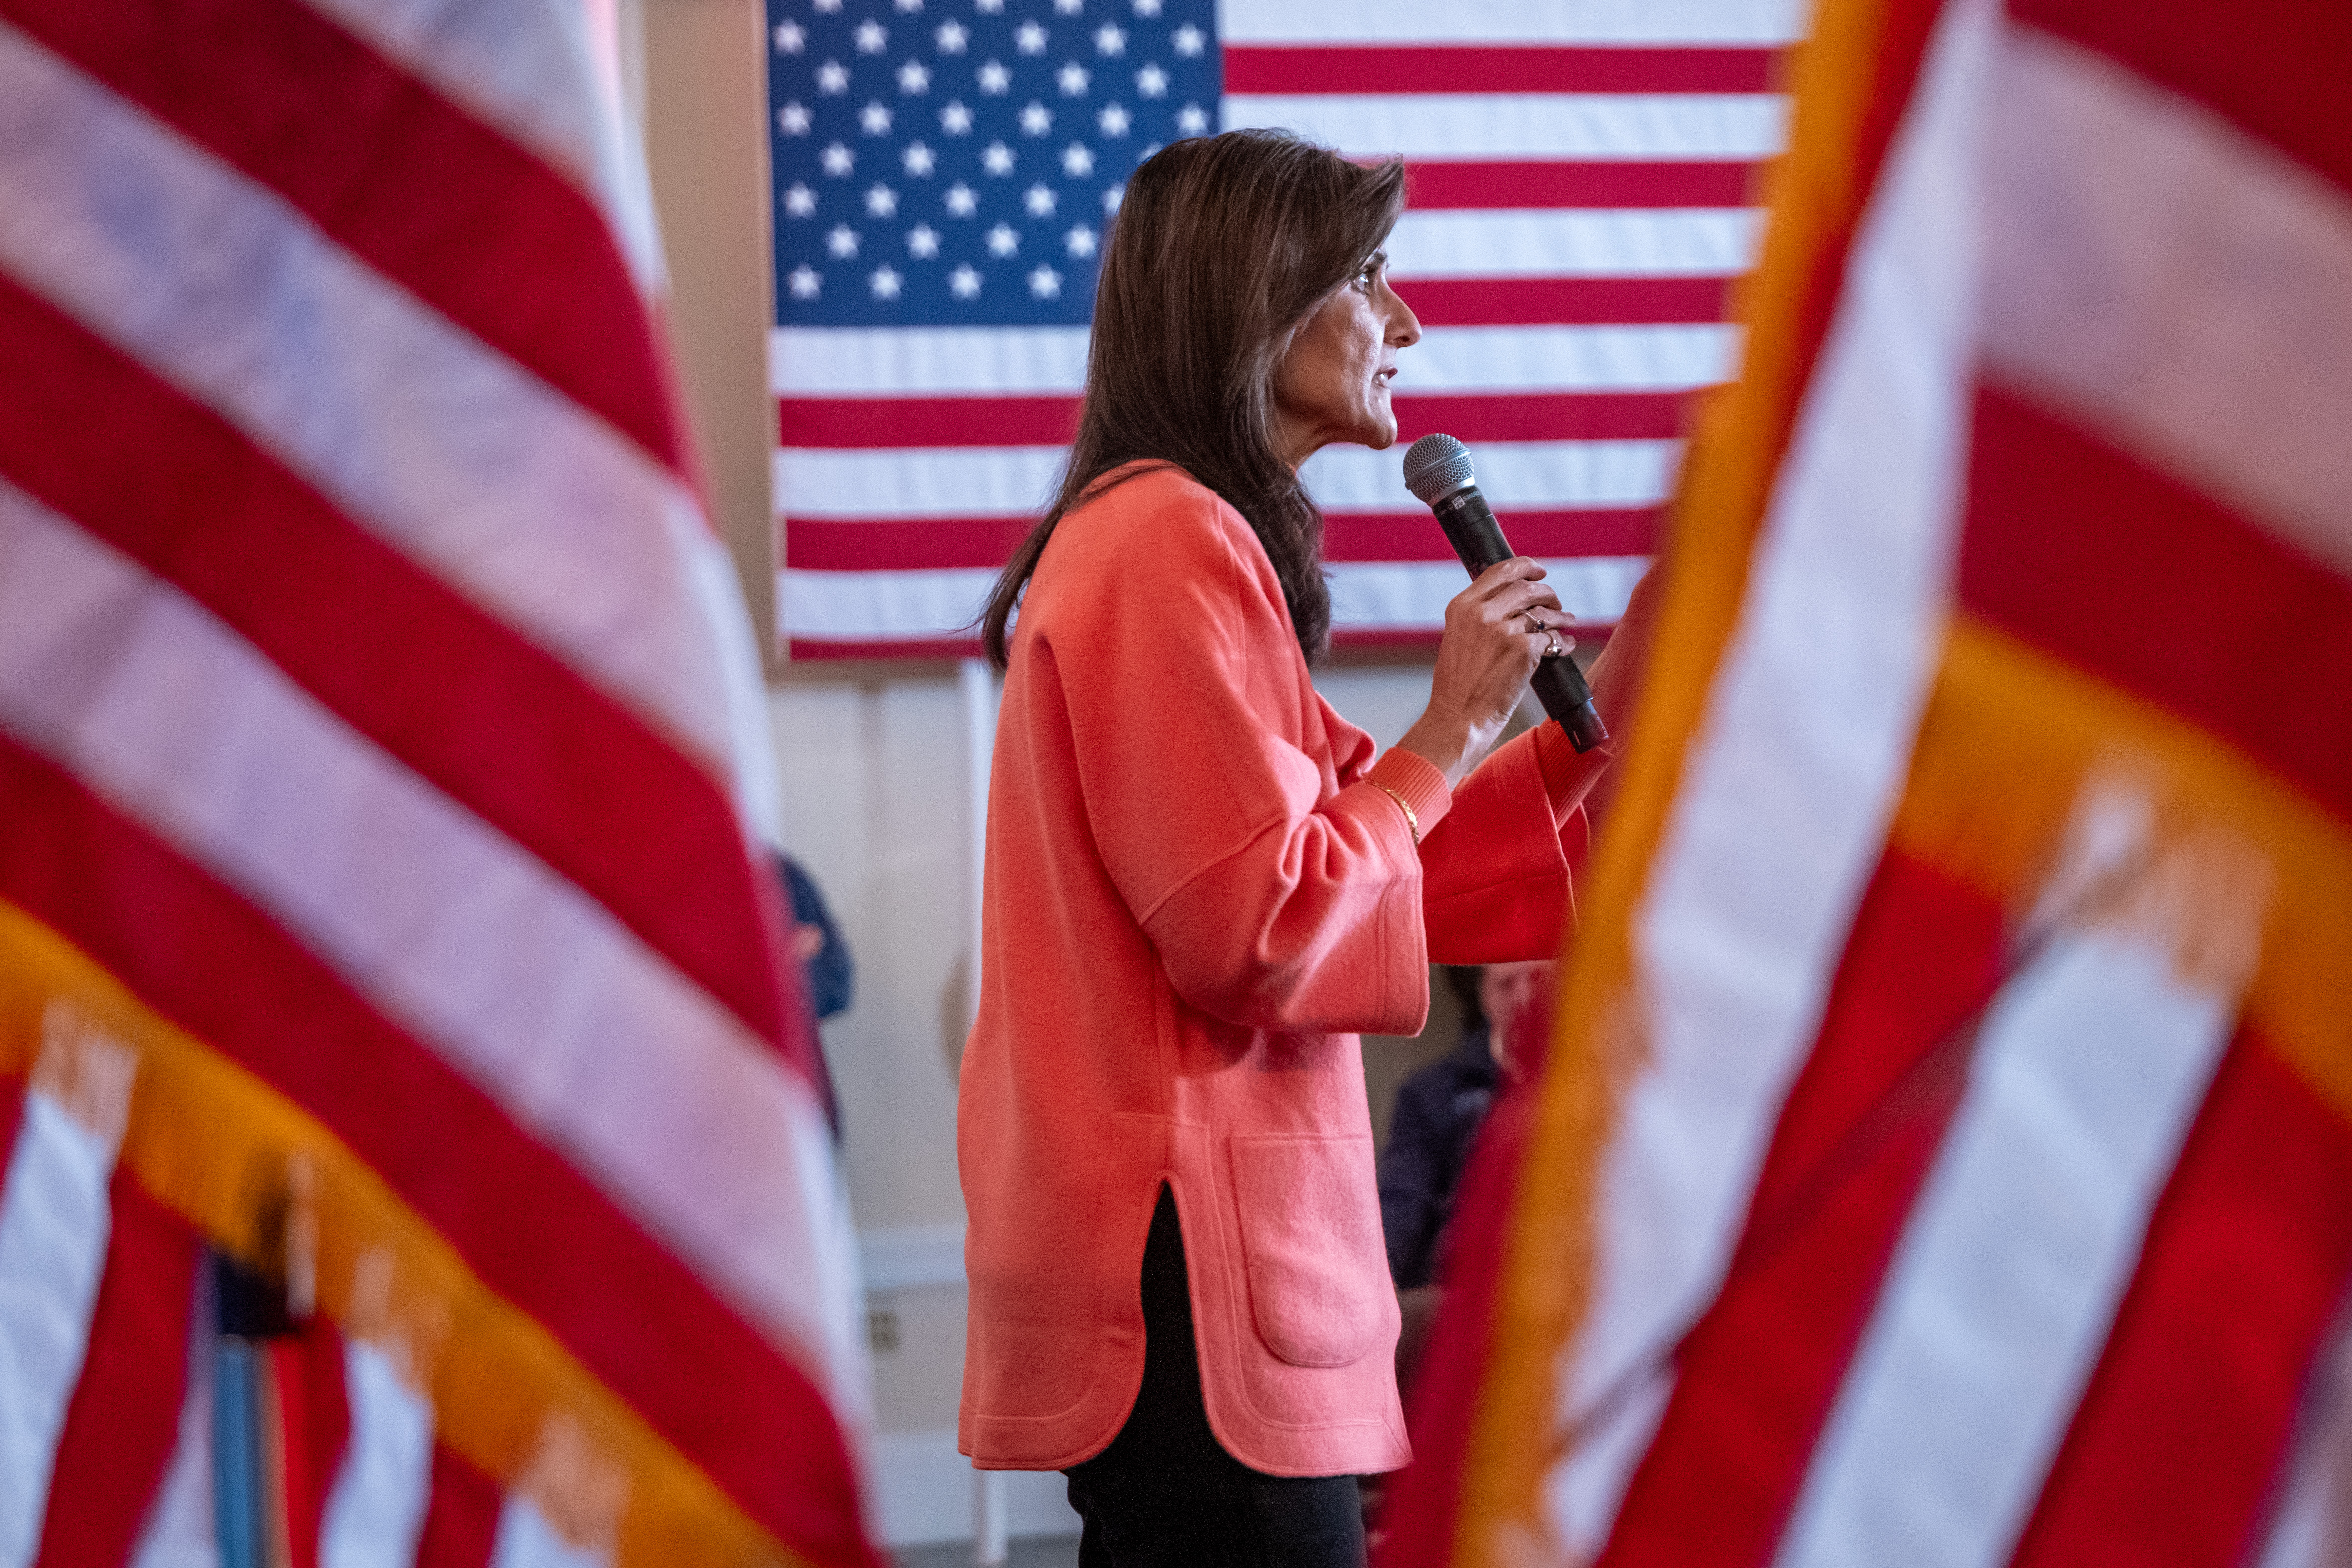 Nikki Haley speaking into a microphone and surrounded by American flags at a campaign stop in New Hampshire.